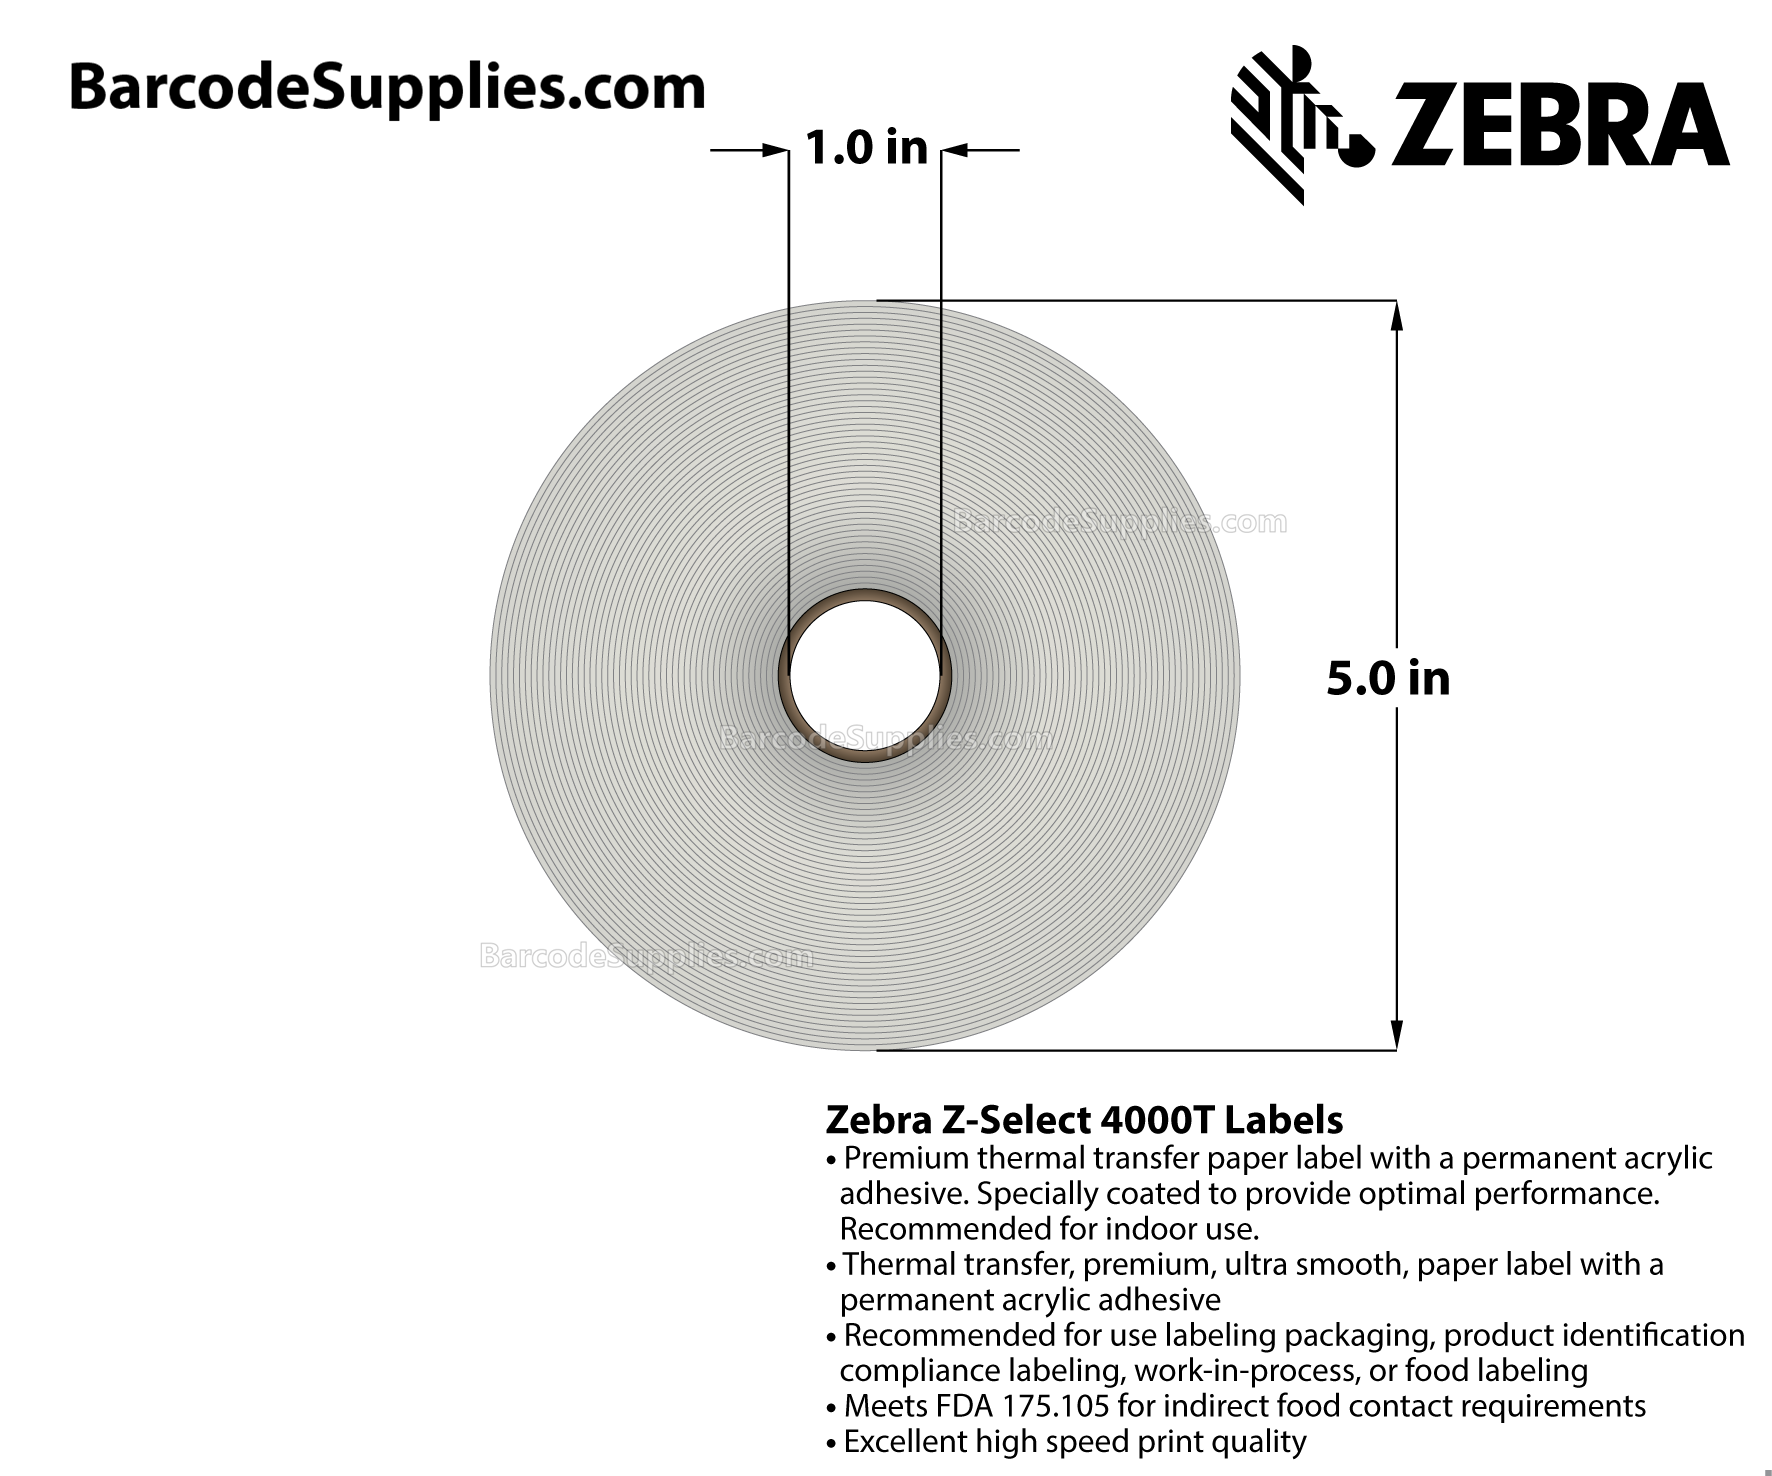 2.75 x 1.25 Thermal Transfer White Z-Select 4000T Labels With Permanent Adhesive - Perforated - 1850 Labels Per Roll - Carton Of 4 Rolls - 7400 Labels Total - MPN: 83260